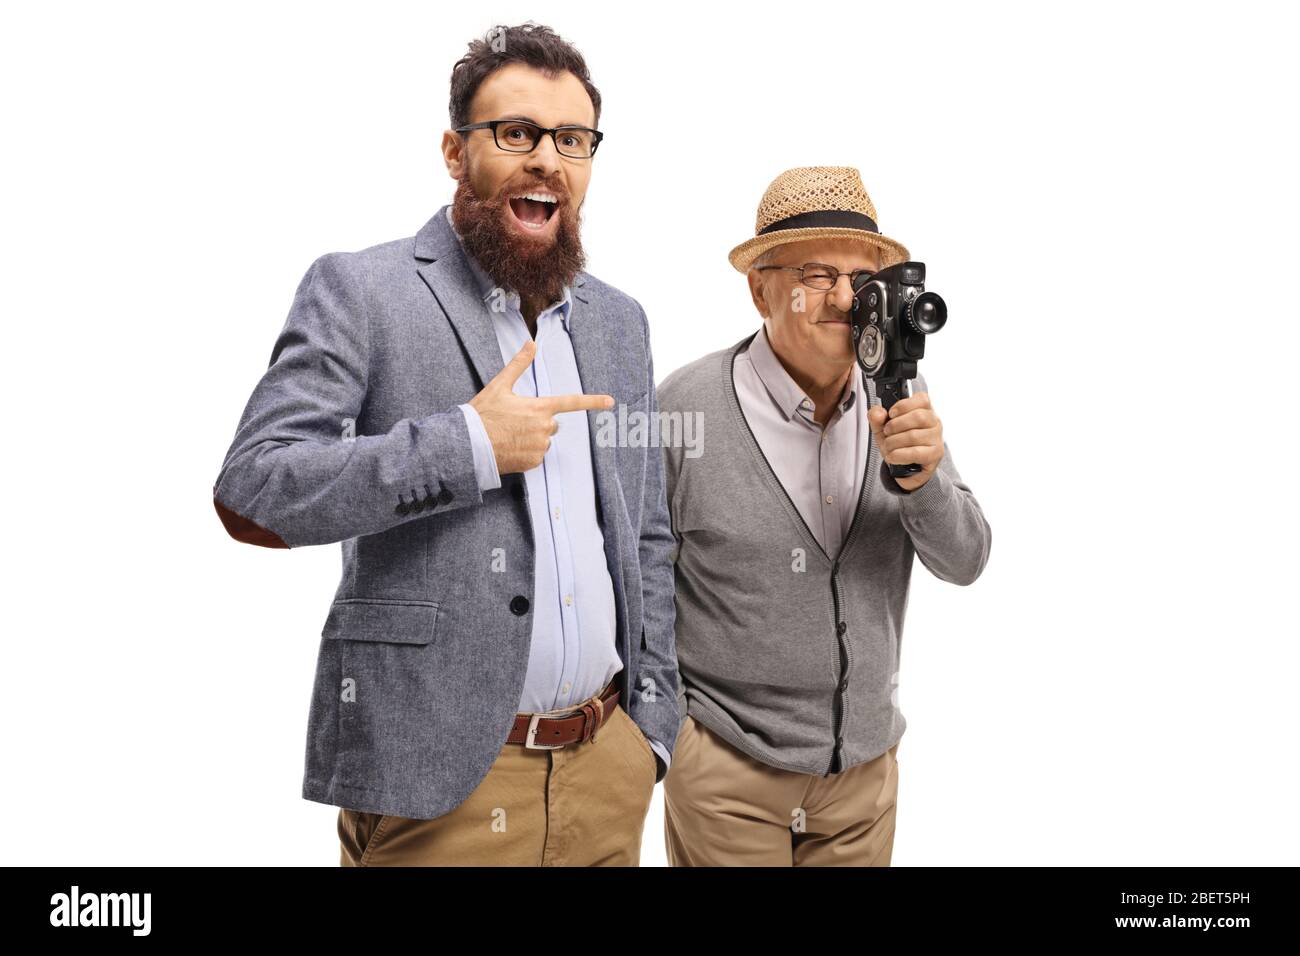 Bearded man laughing and pointing at an elderly gentleman with a vintage camera isolated on white background Stock Photo